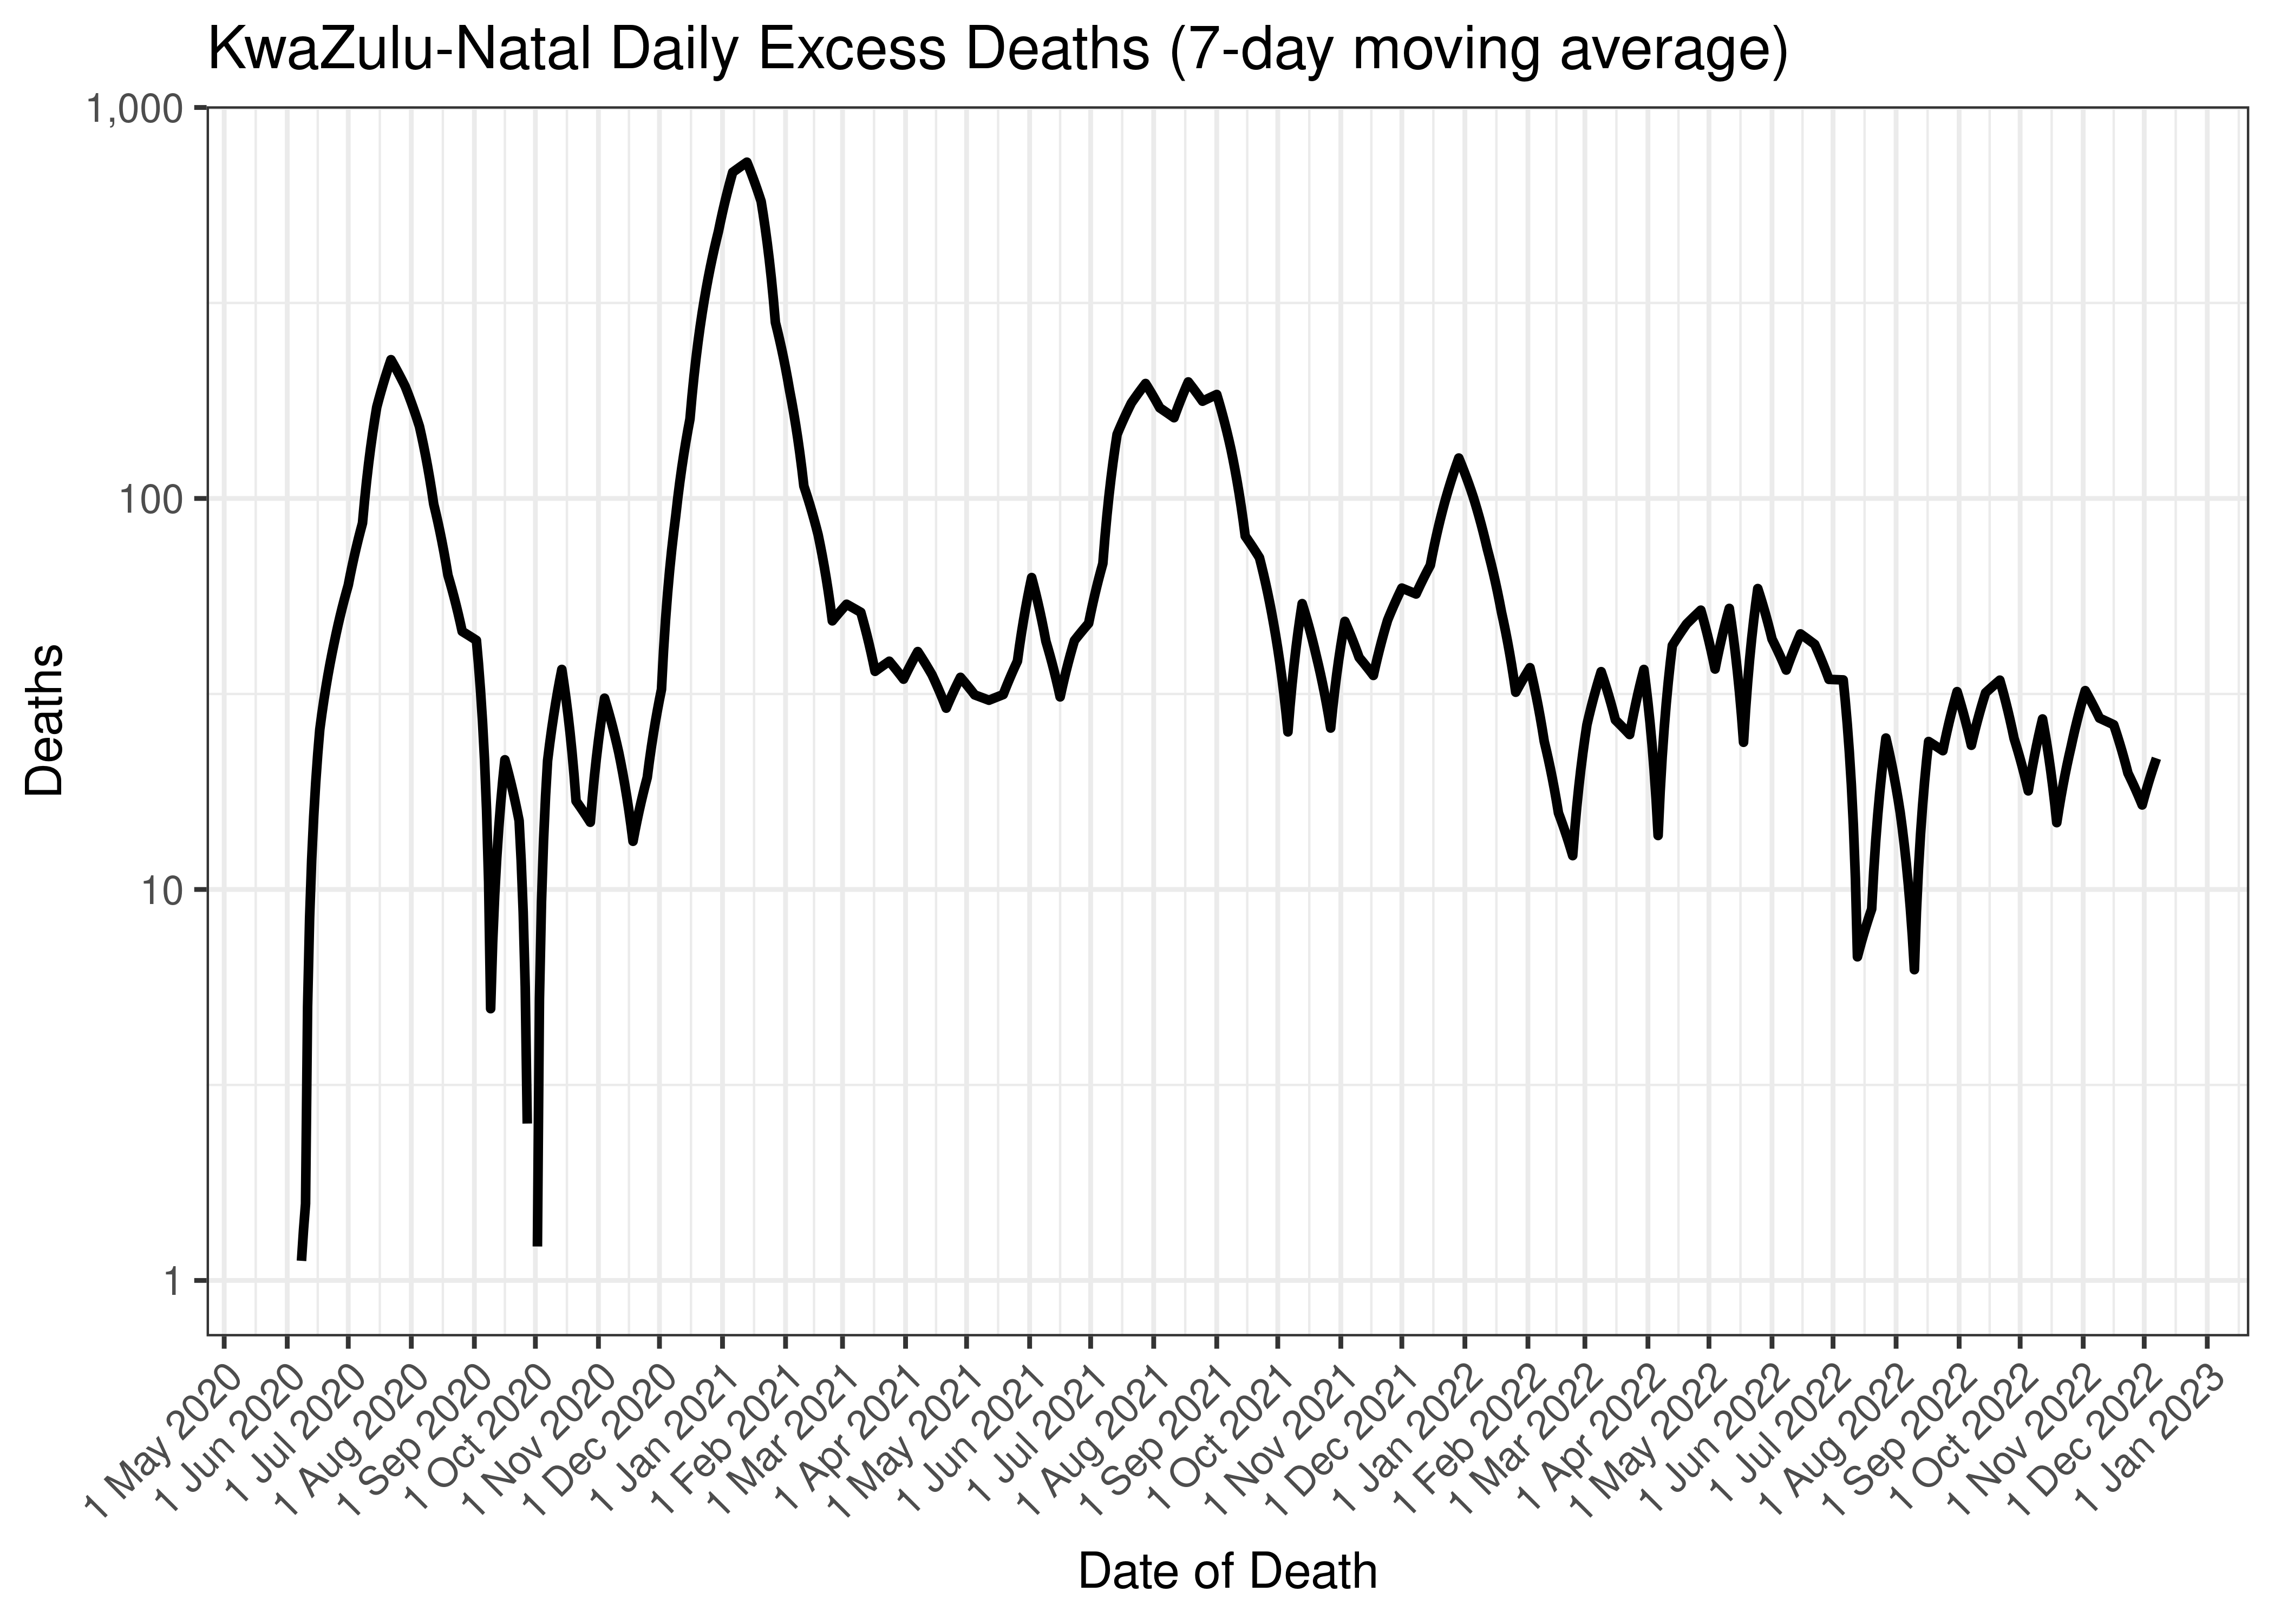 KwaZulu-Natal Daily Excess Deaths (7-day moving average)